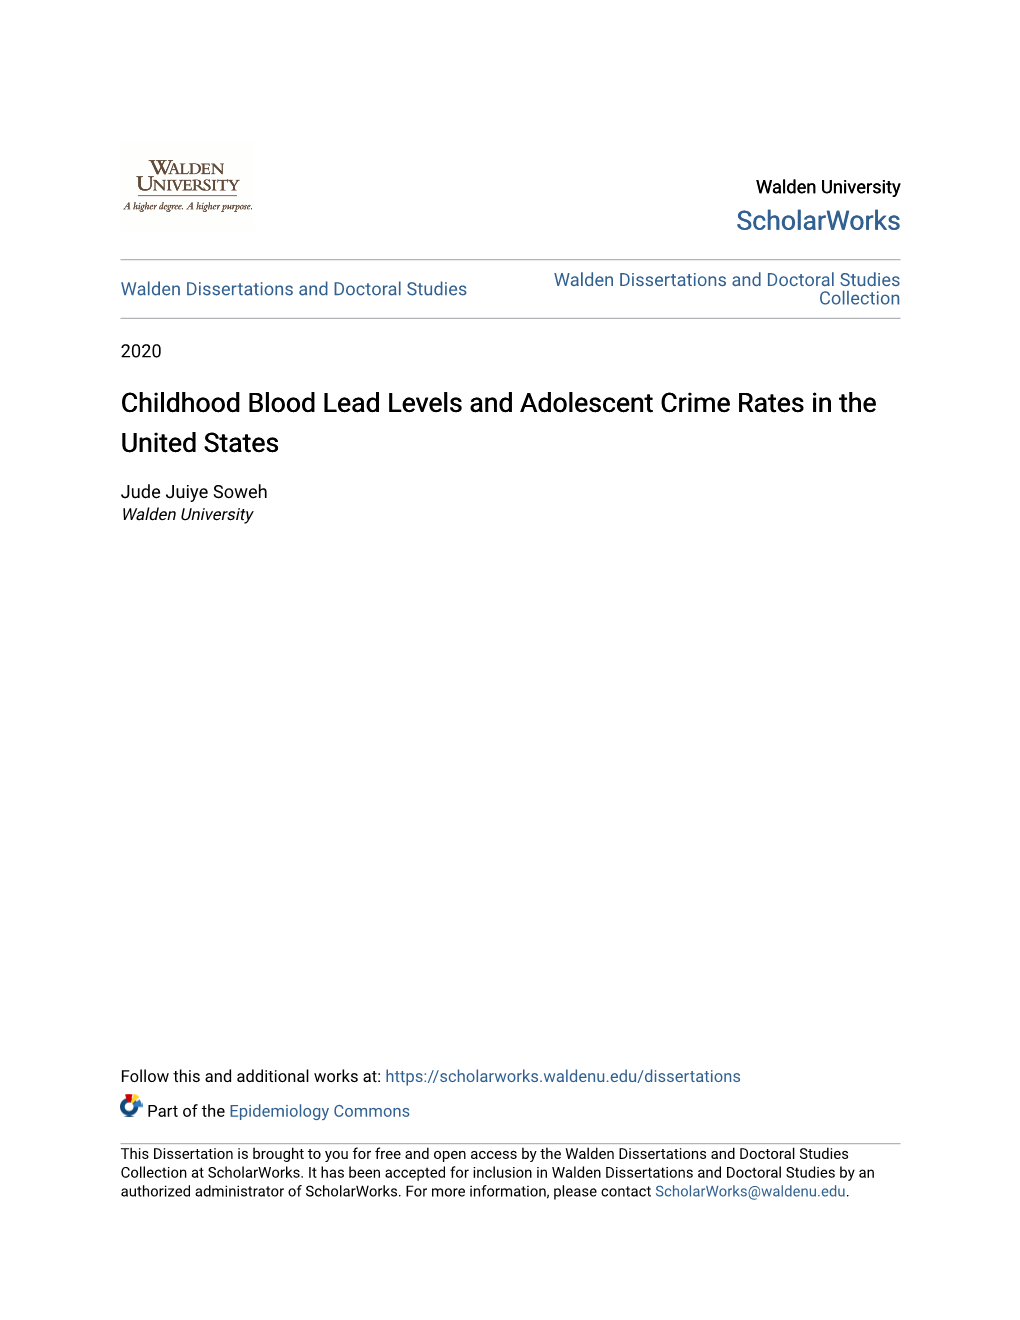 Childhood Blood Lead Levels and Adolescent Crime Rates in the United States